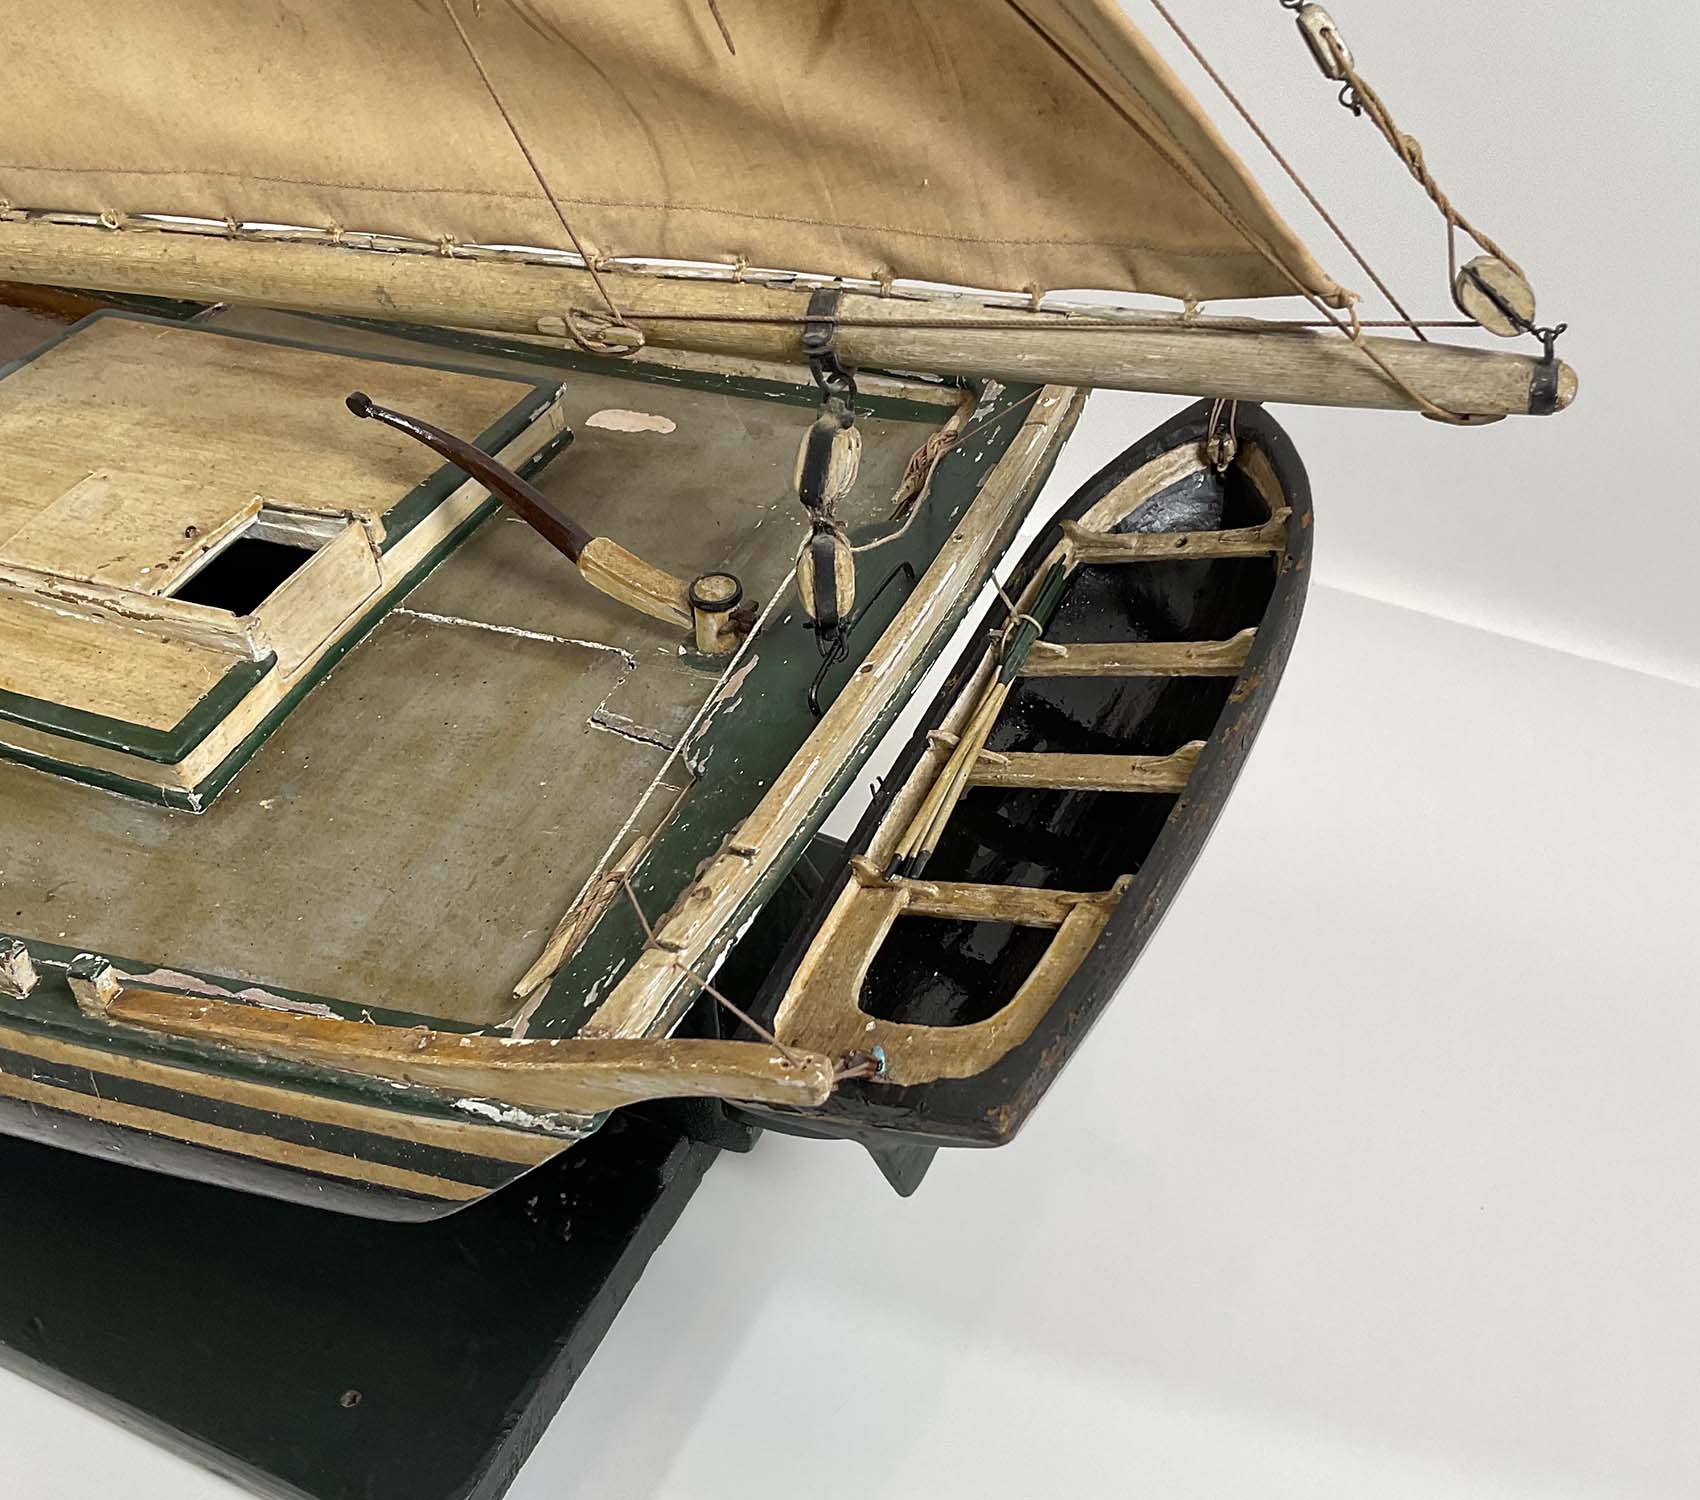 Model Of The Oyster Sloop Fanny Fern Of Quincy Mass - Lannan Gallery